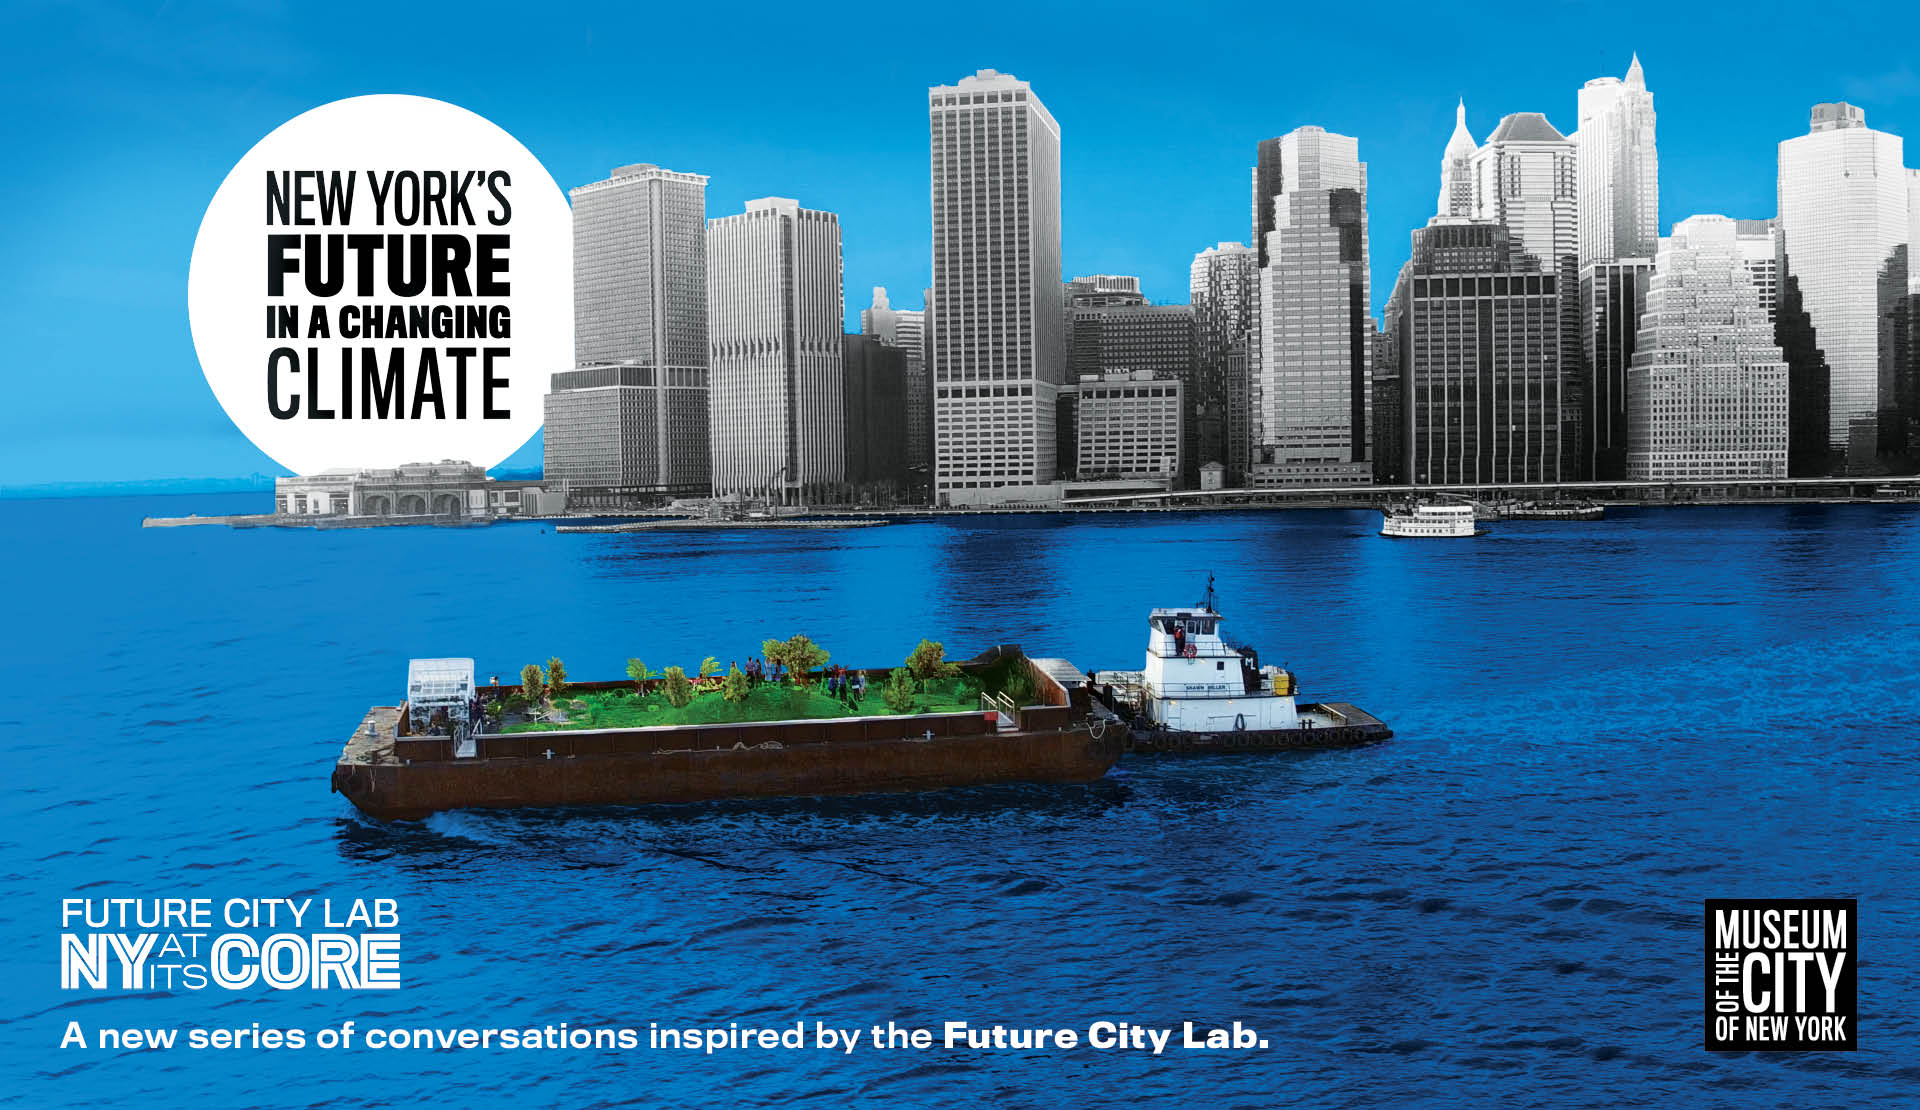 New York's Future in a Changing Climate | Museum of the City of New York